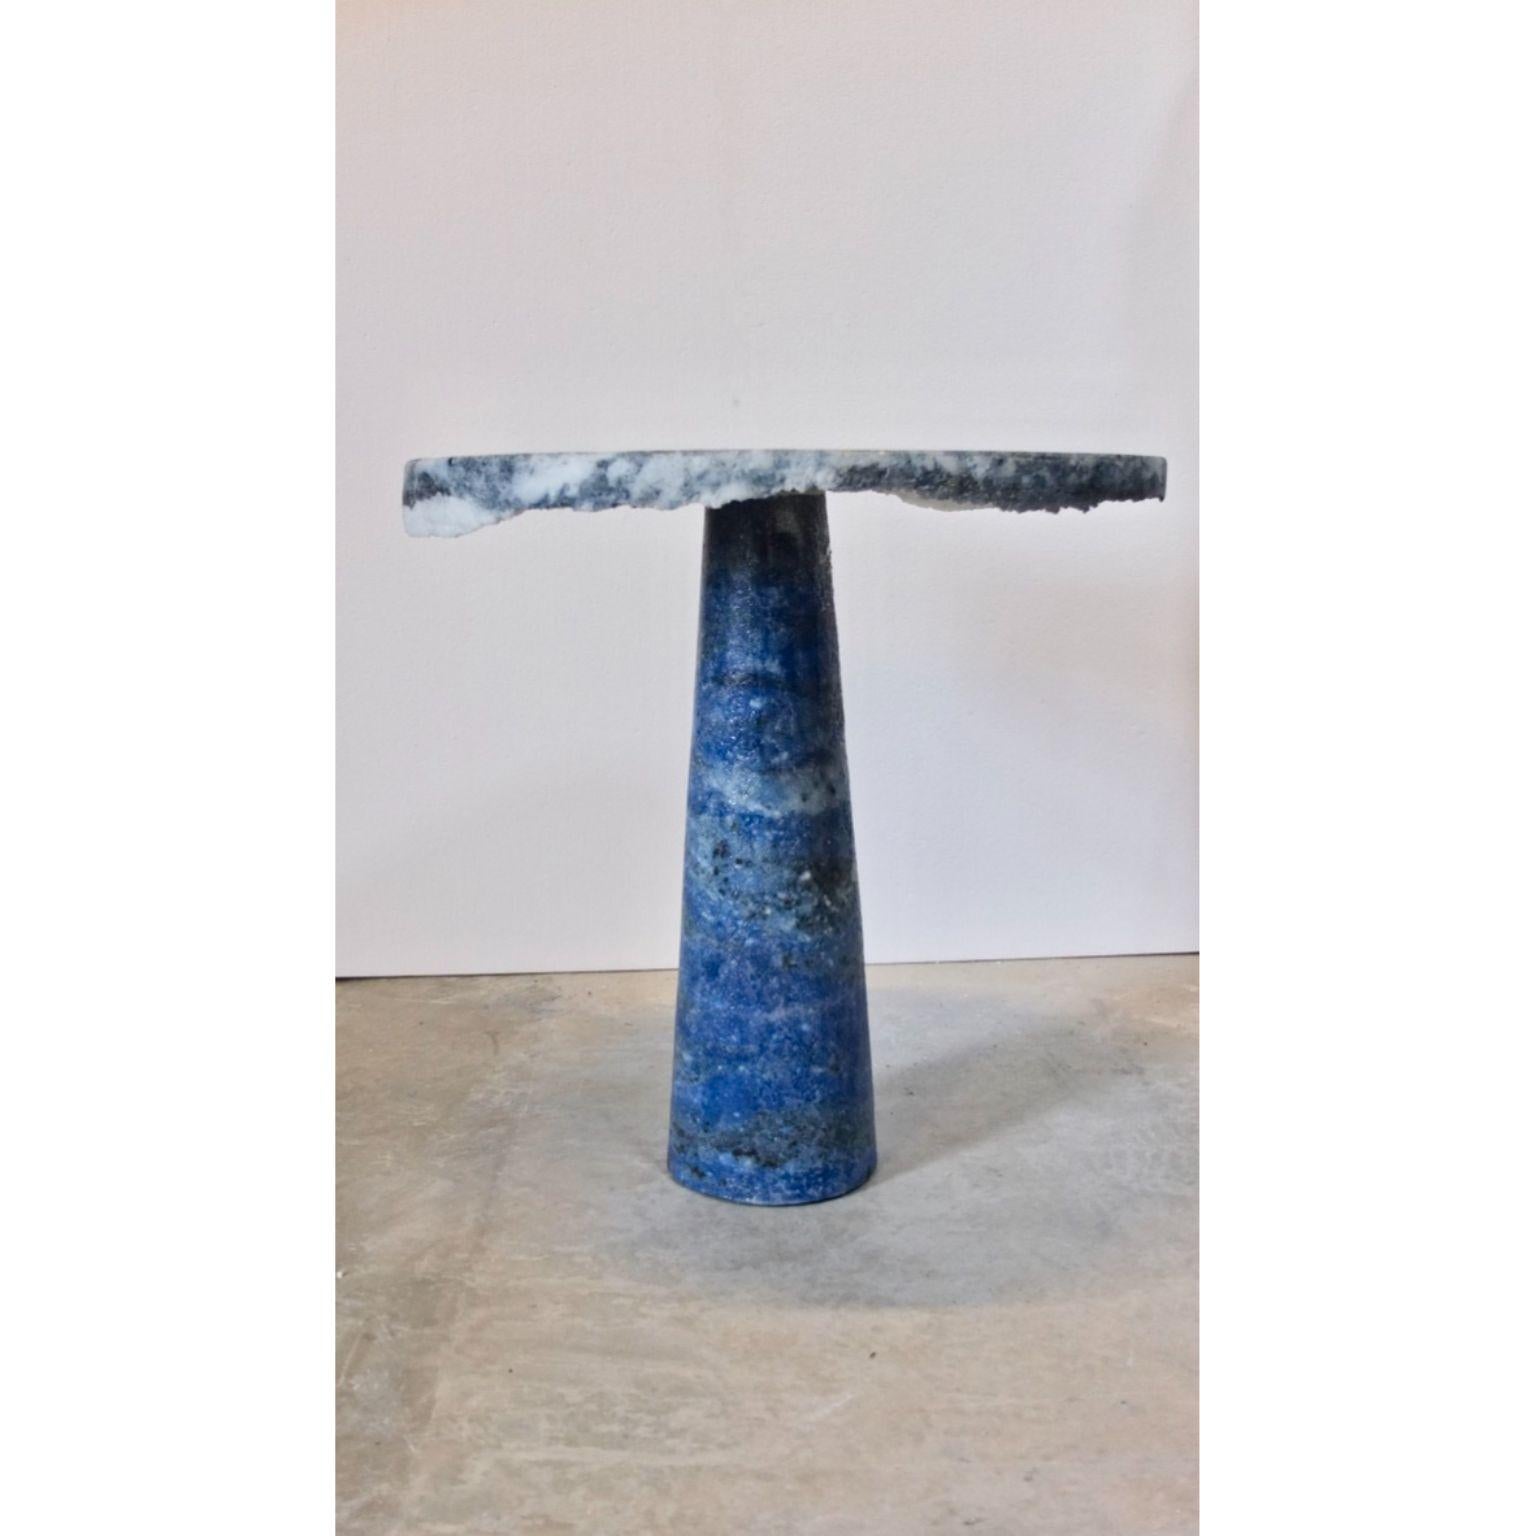 Marble salt side table by Roxane Lahidji
Material: Marbled salts
 A unique award winning technique developed by Roxane Lahidji
Dimensions: 50 x 50 x 50 cm
Unique 
Other dimensions available.

Award winner of Bolia Design Awards 2019 and FD100